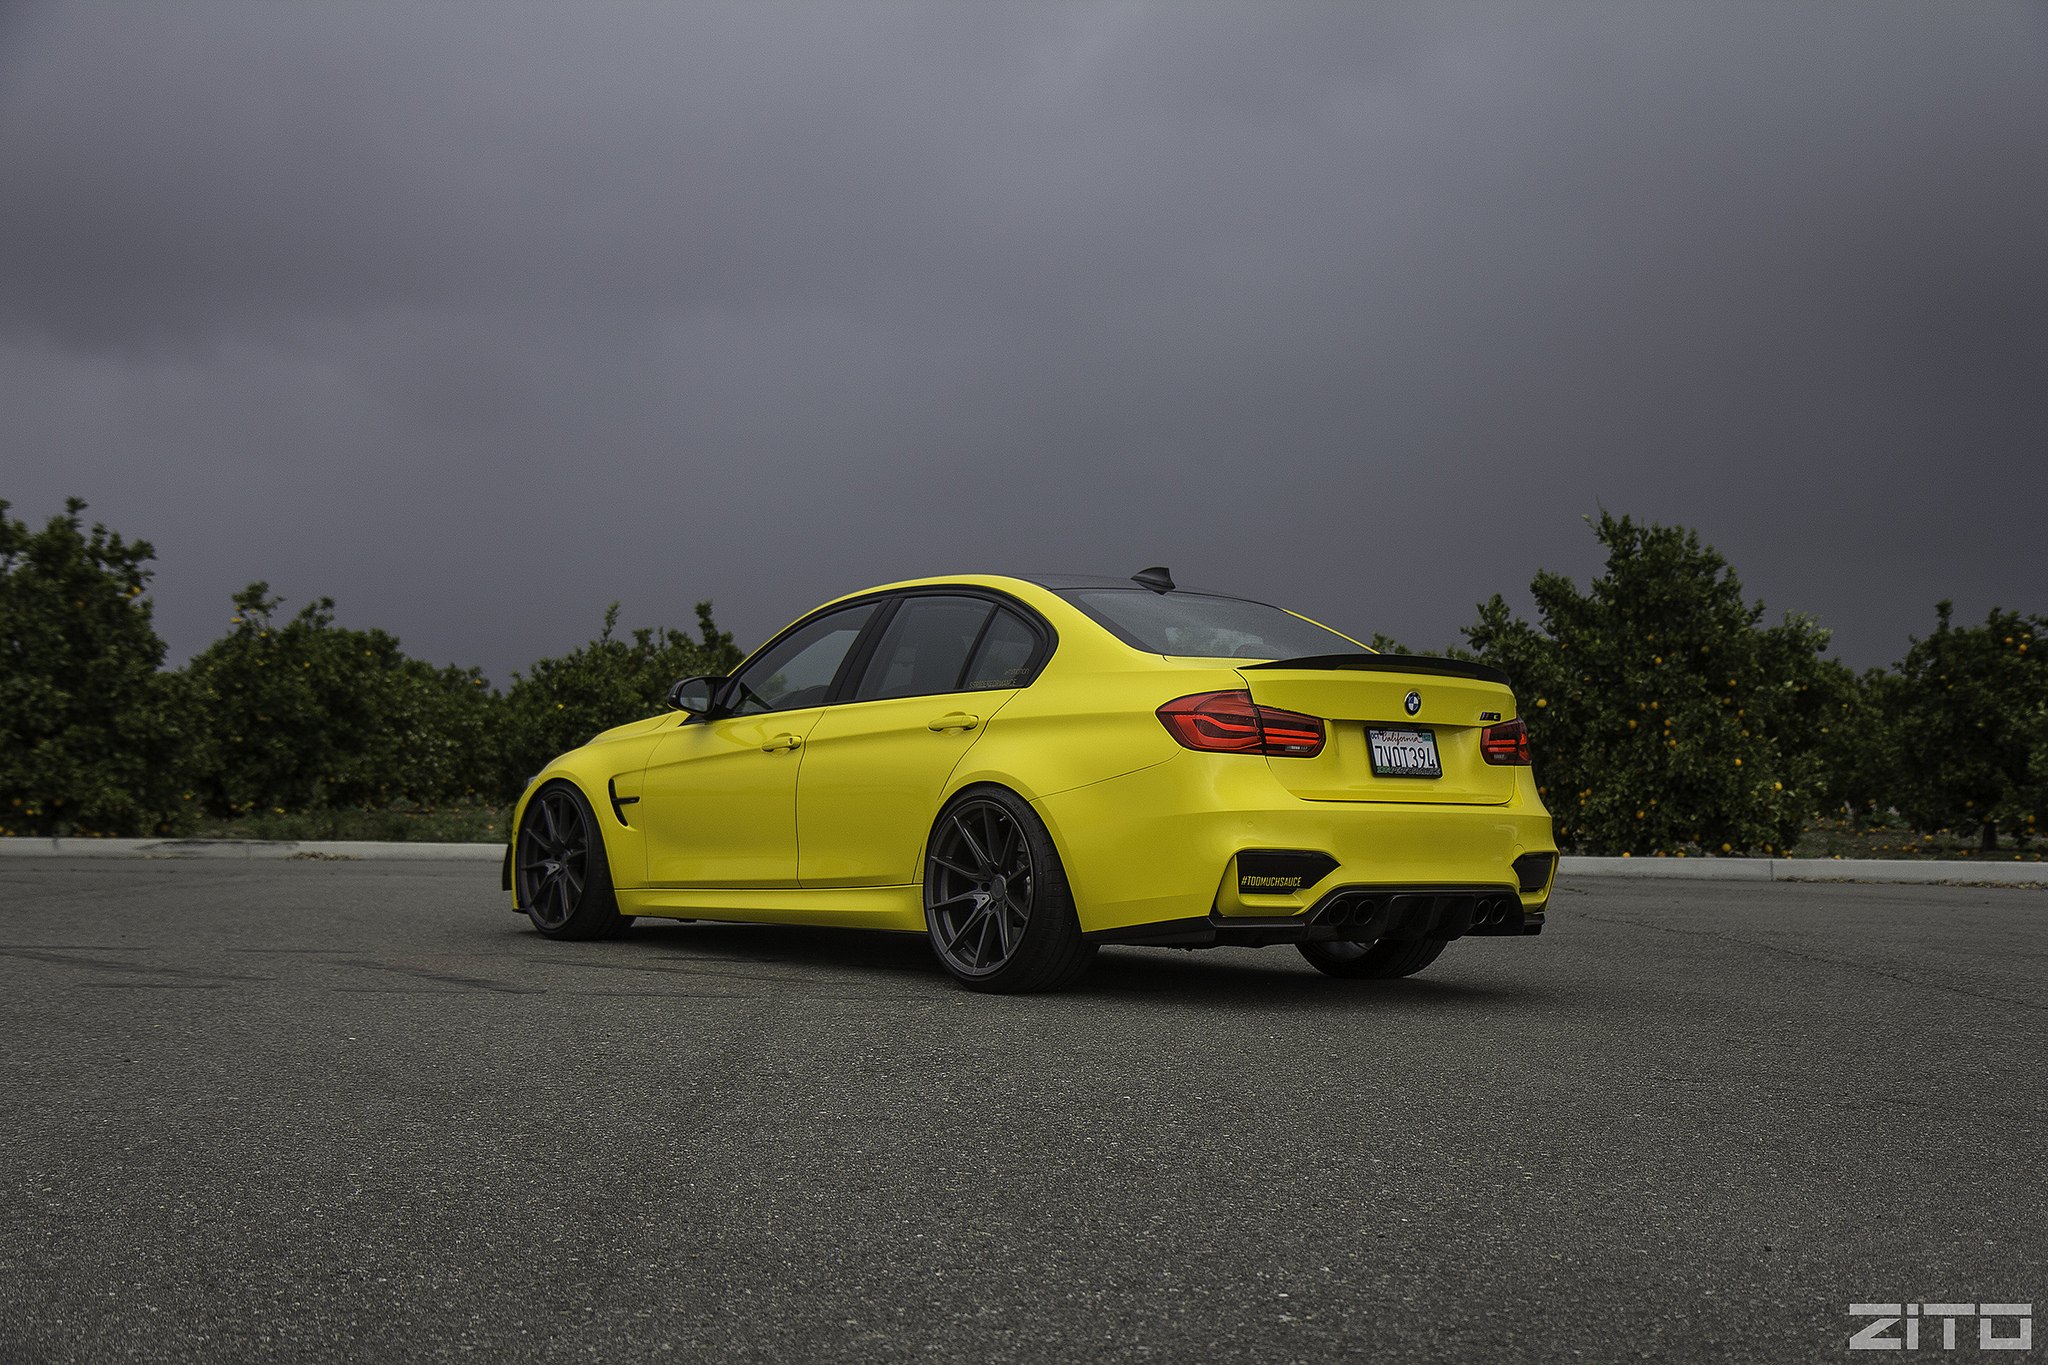 Yellow BMW 3-Series with Matte Black Zito Rims - Photo by Zito Wheels